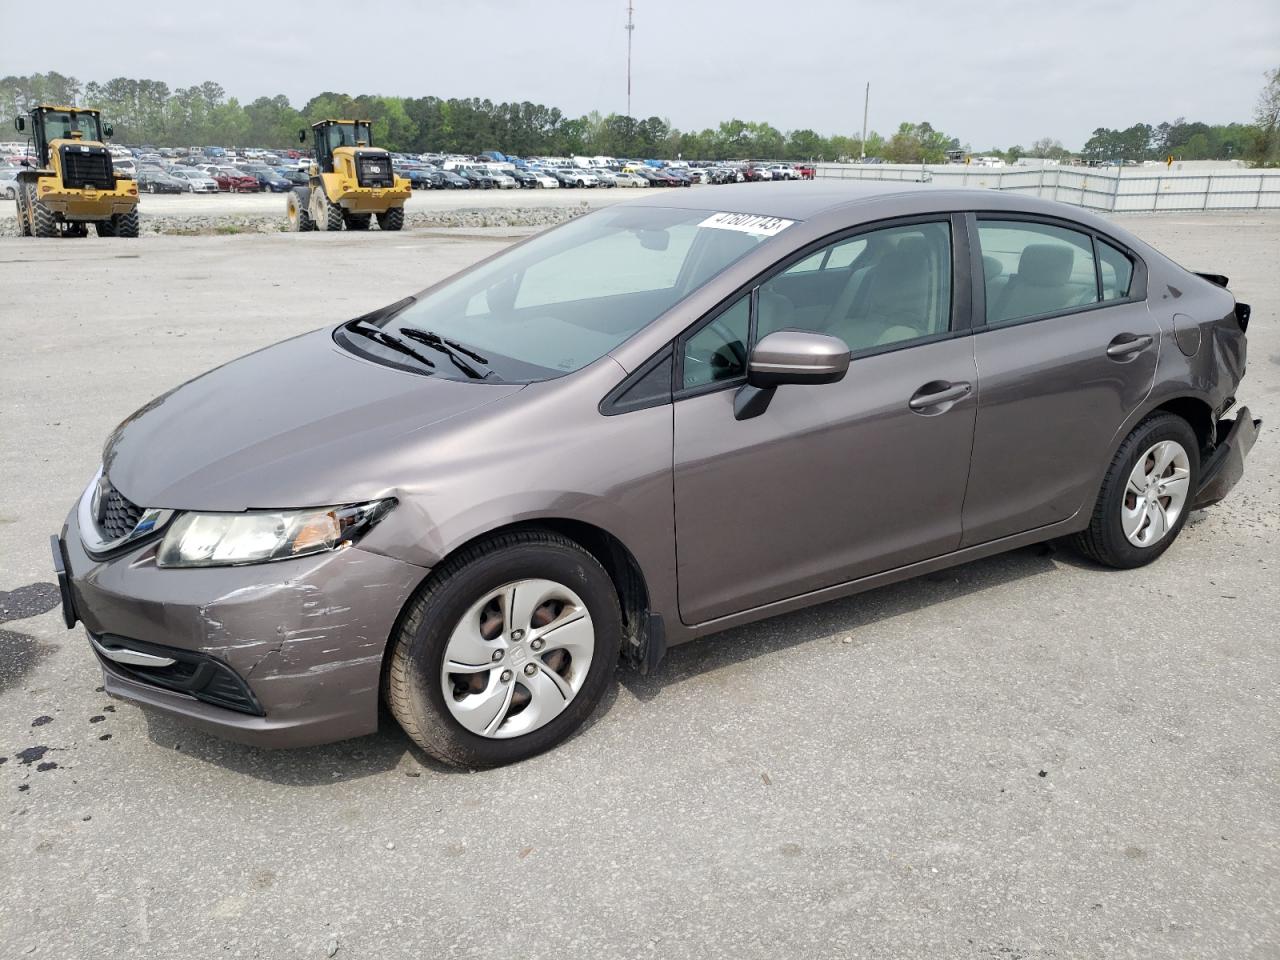 vin: 19XFB2F53FE117218 19XFB2F53FE117218 2015 honda civic 1800 for Sale in 28334 5446, Nc - Raleigh, Dunn, USA